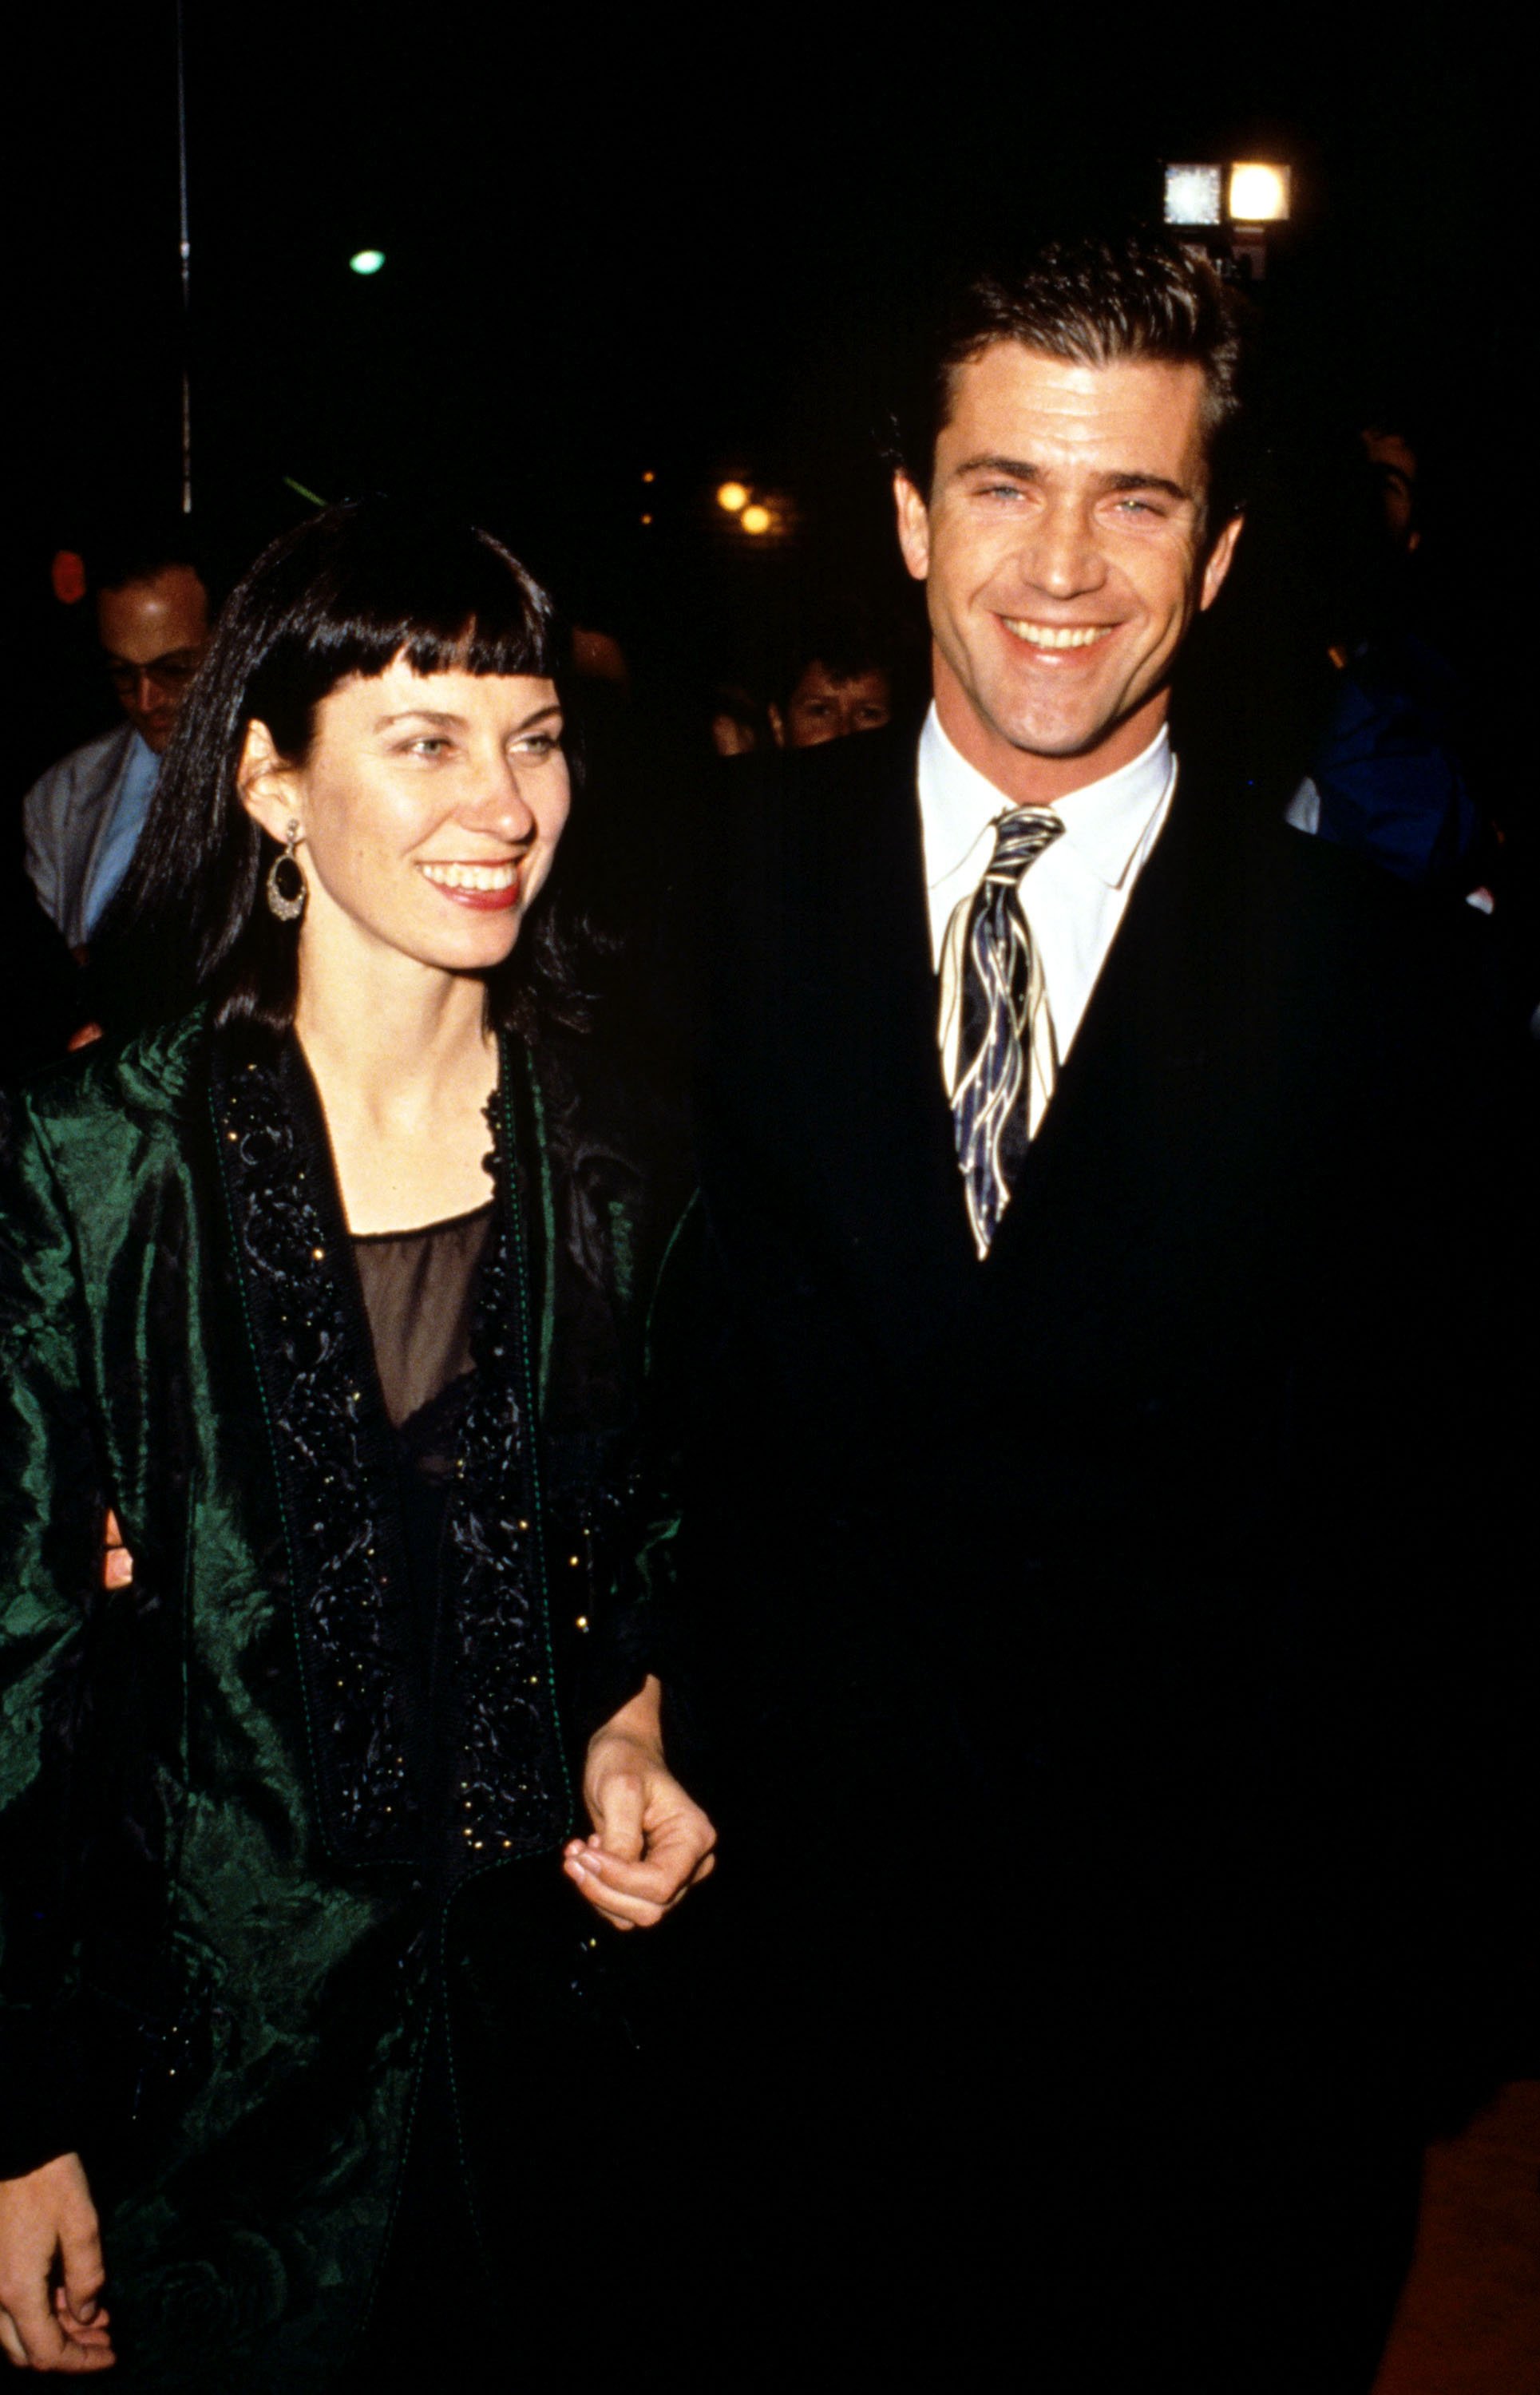 Robyn Moore and Mel Gibson during the "Hamlet" Los Angeles premiere on December 18, 1990. / Source: Getty Images